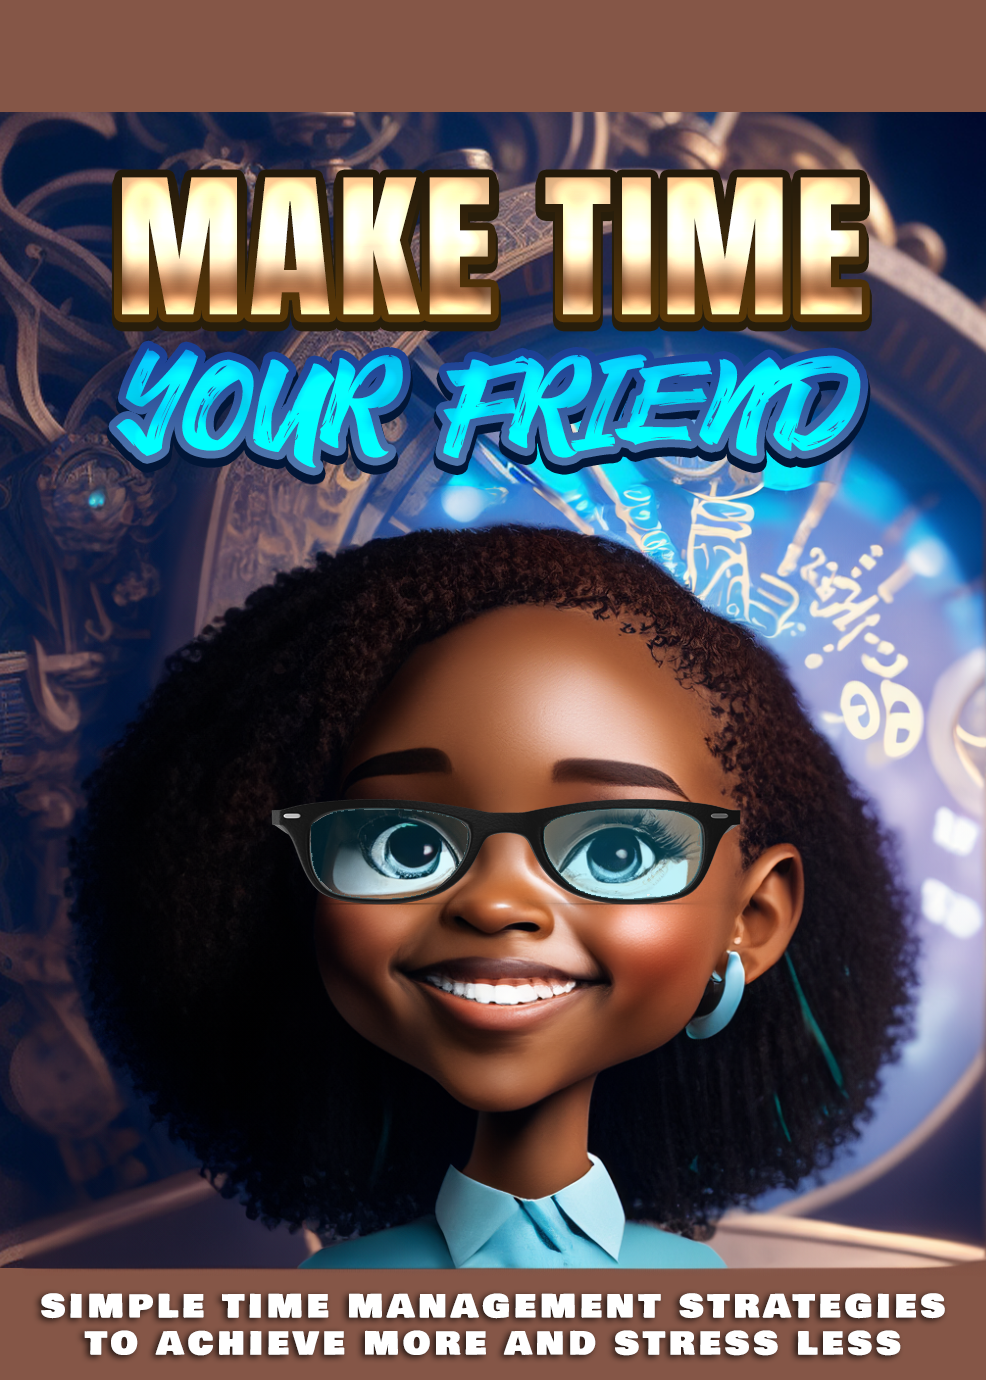 License - Make Time Your Friend